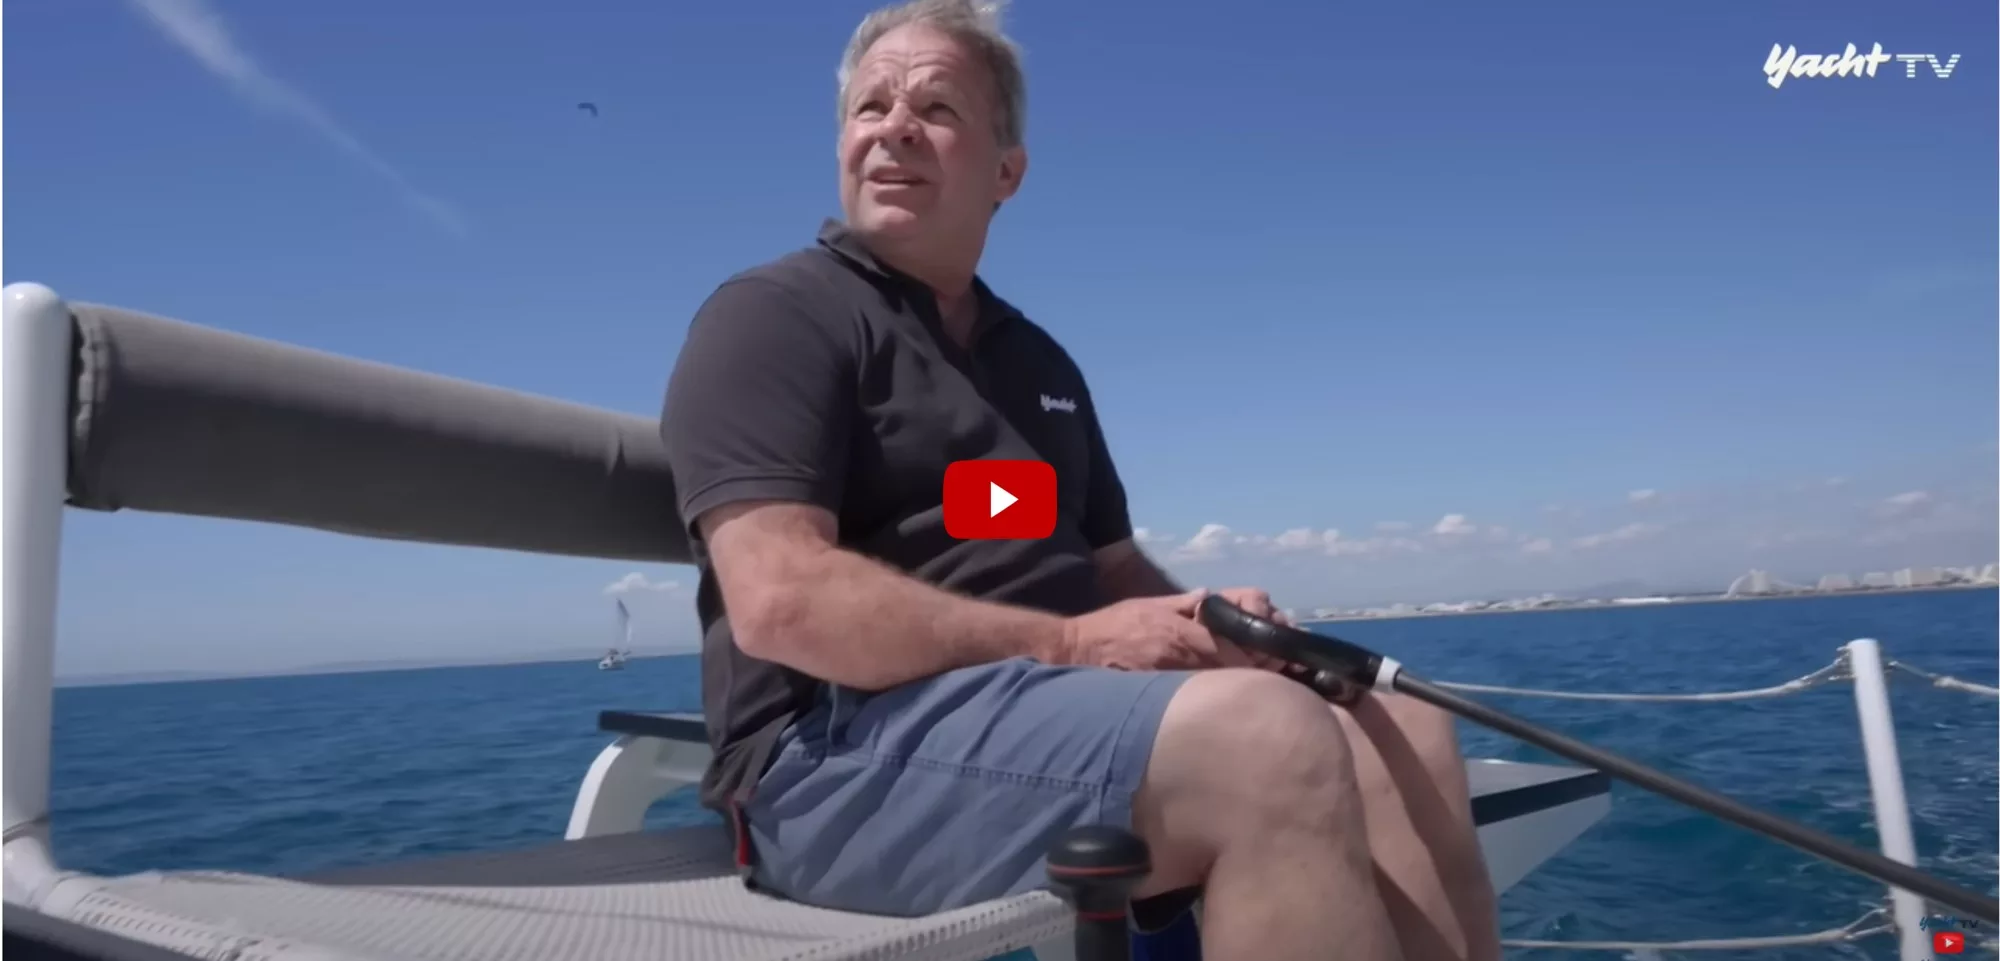 Yacht TV’s video review of Rapido 40 (German)